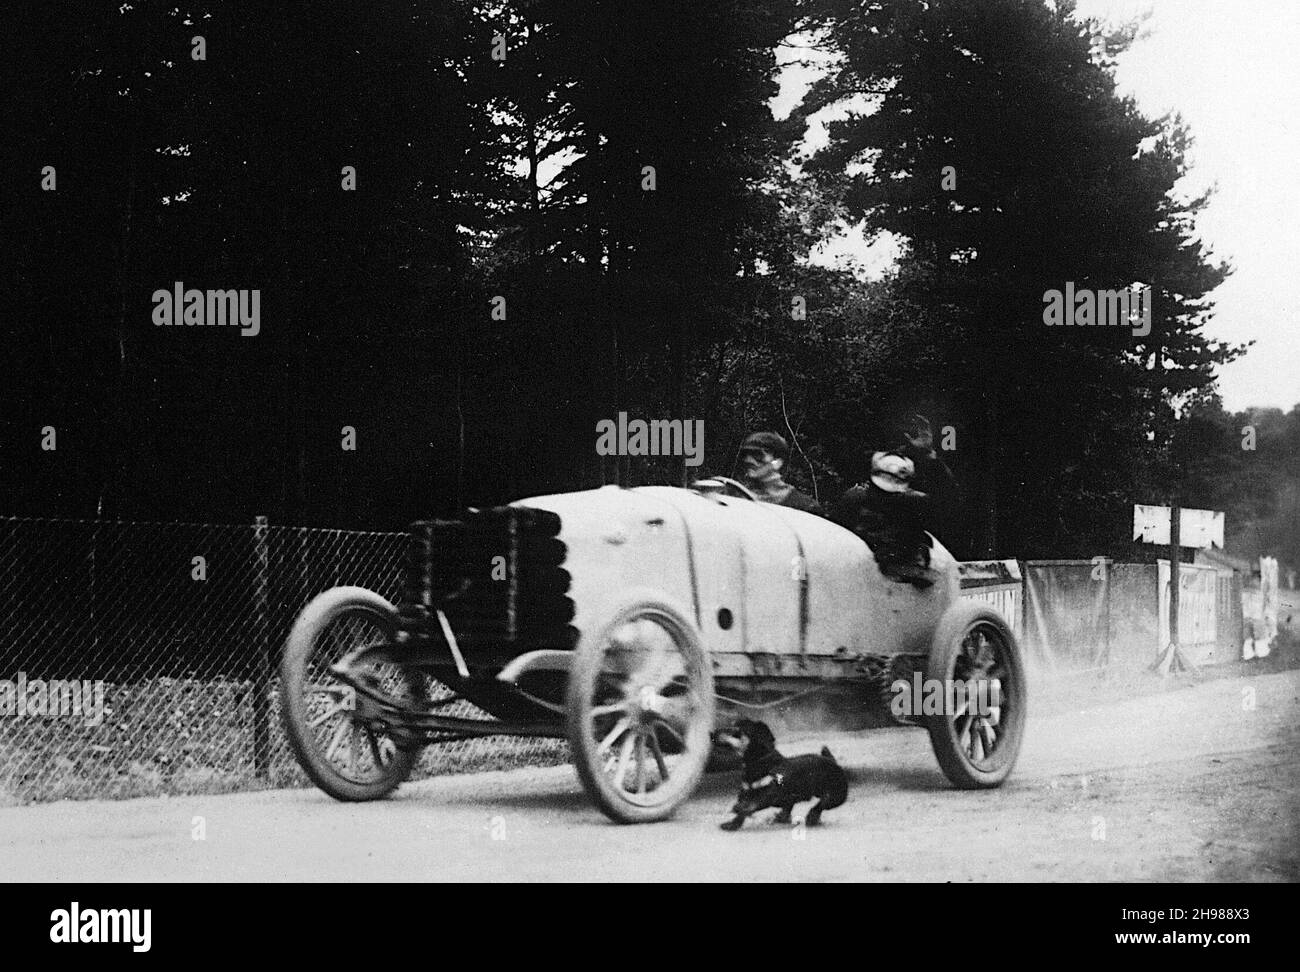 Turcat Mery driven by Henri Rougier at the 1904 Gordon Bennett Cup, Homburg, Germany. Rougier finished the race in third place. Stock Photo